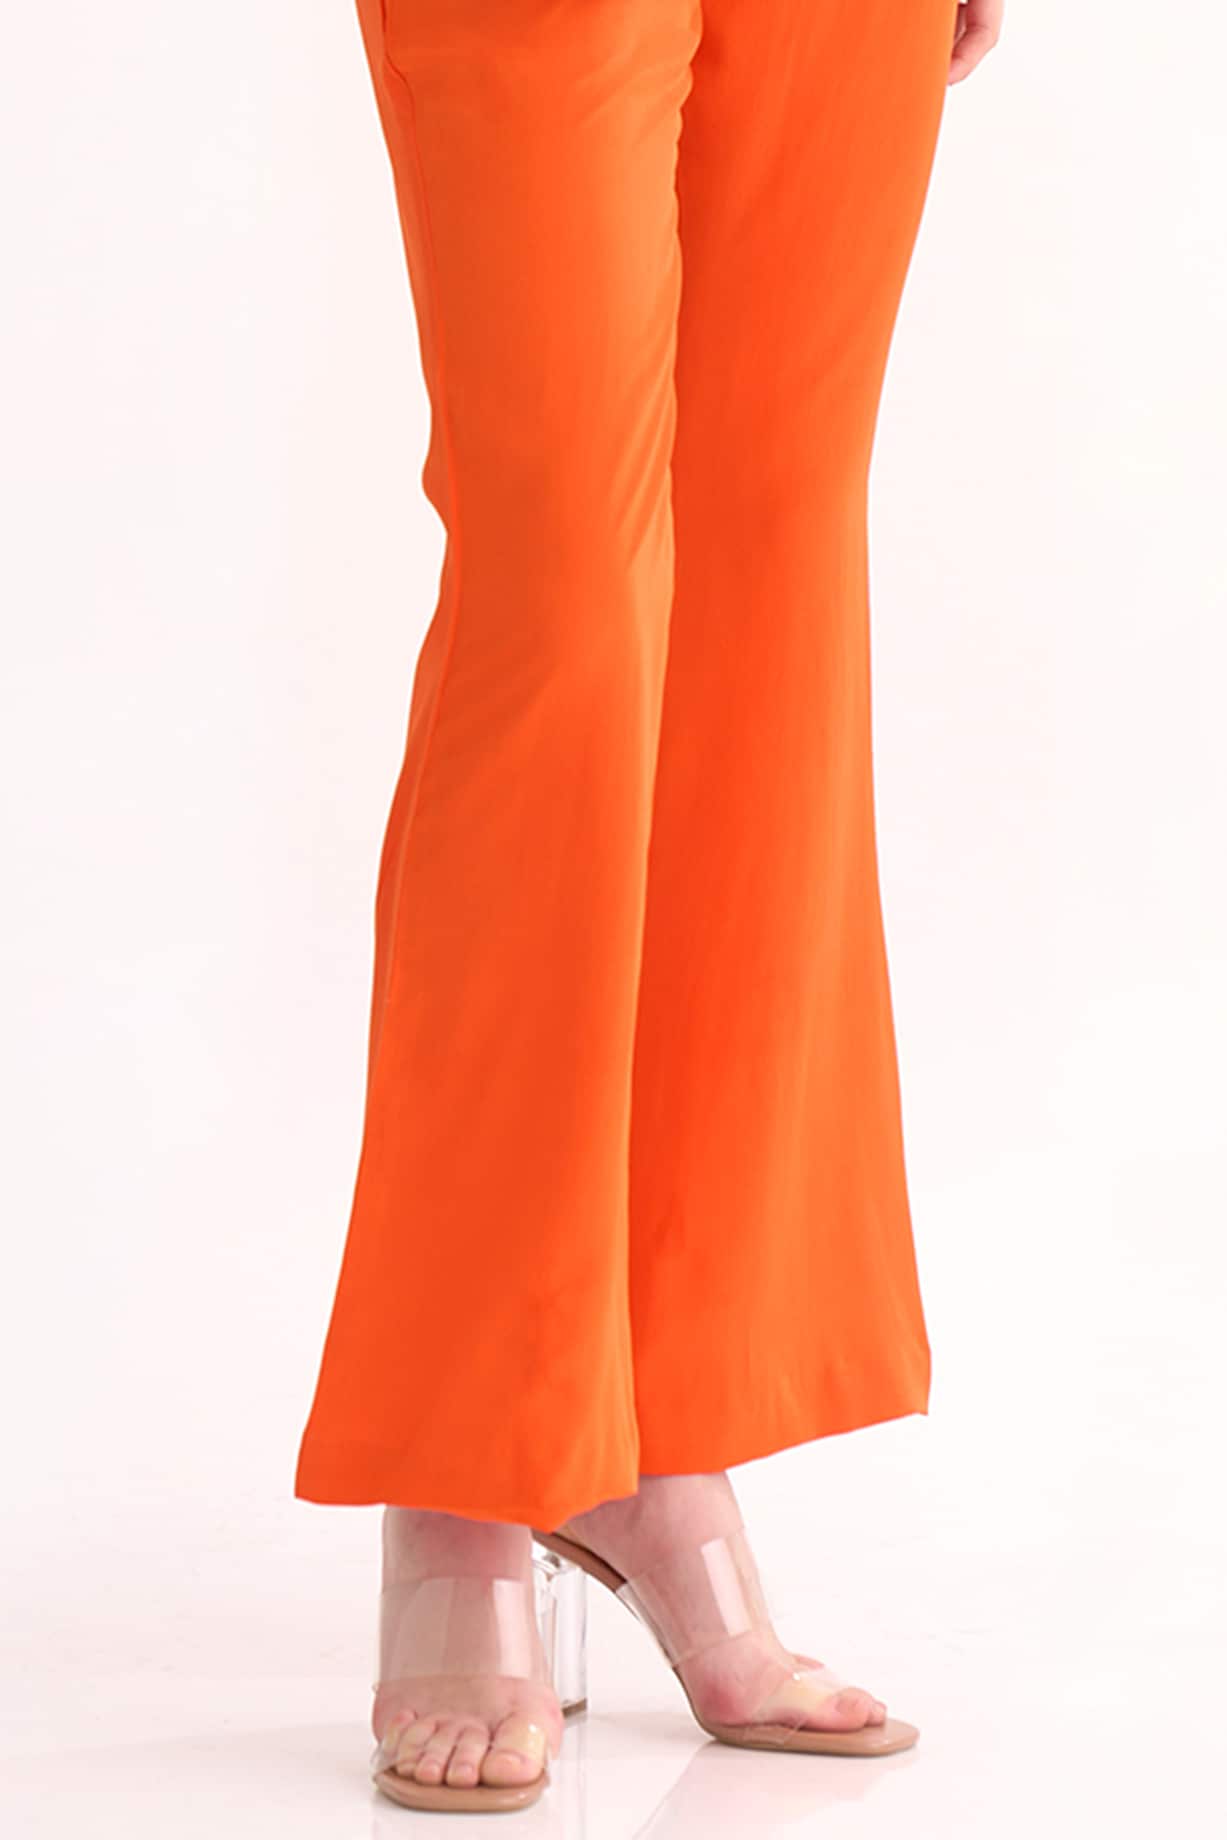 Poppy Orange Silk Crepe Pants Design by Our Love at Pernia's Pop